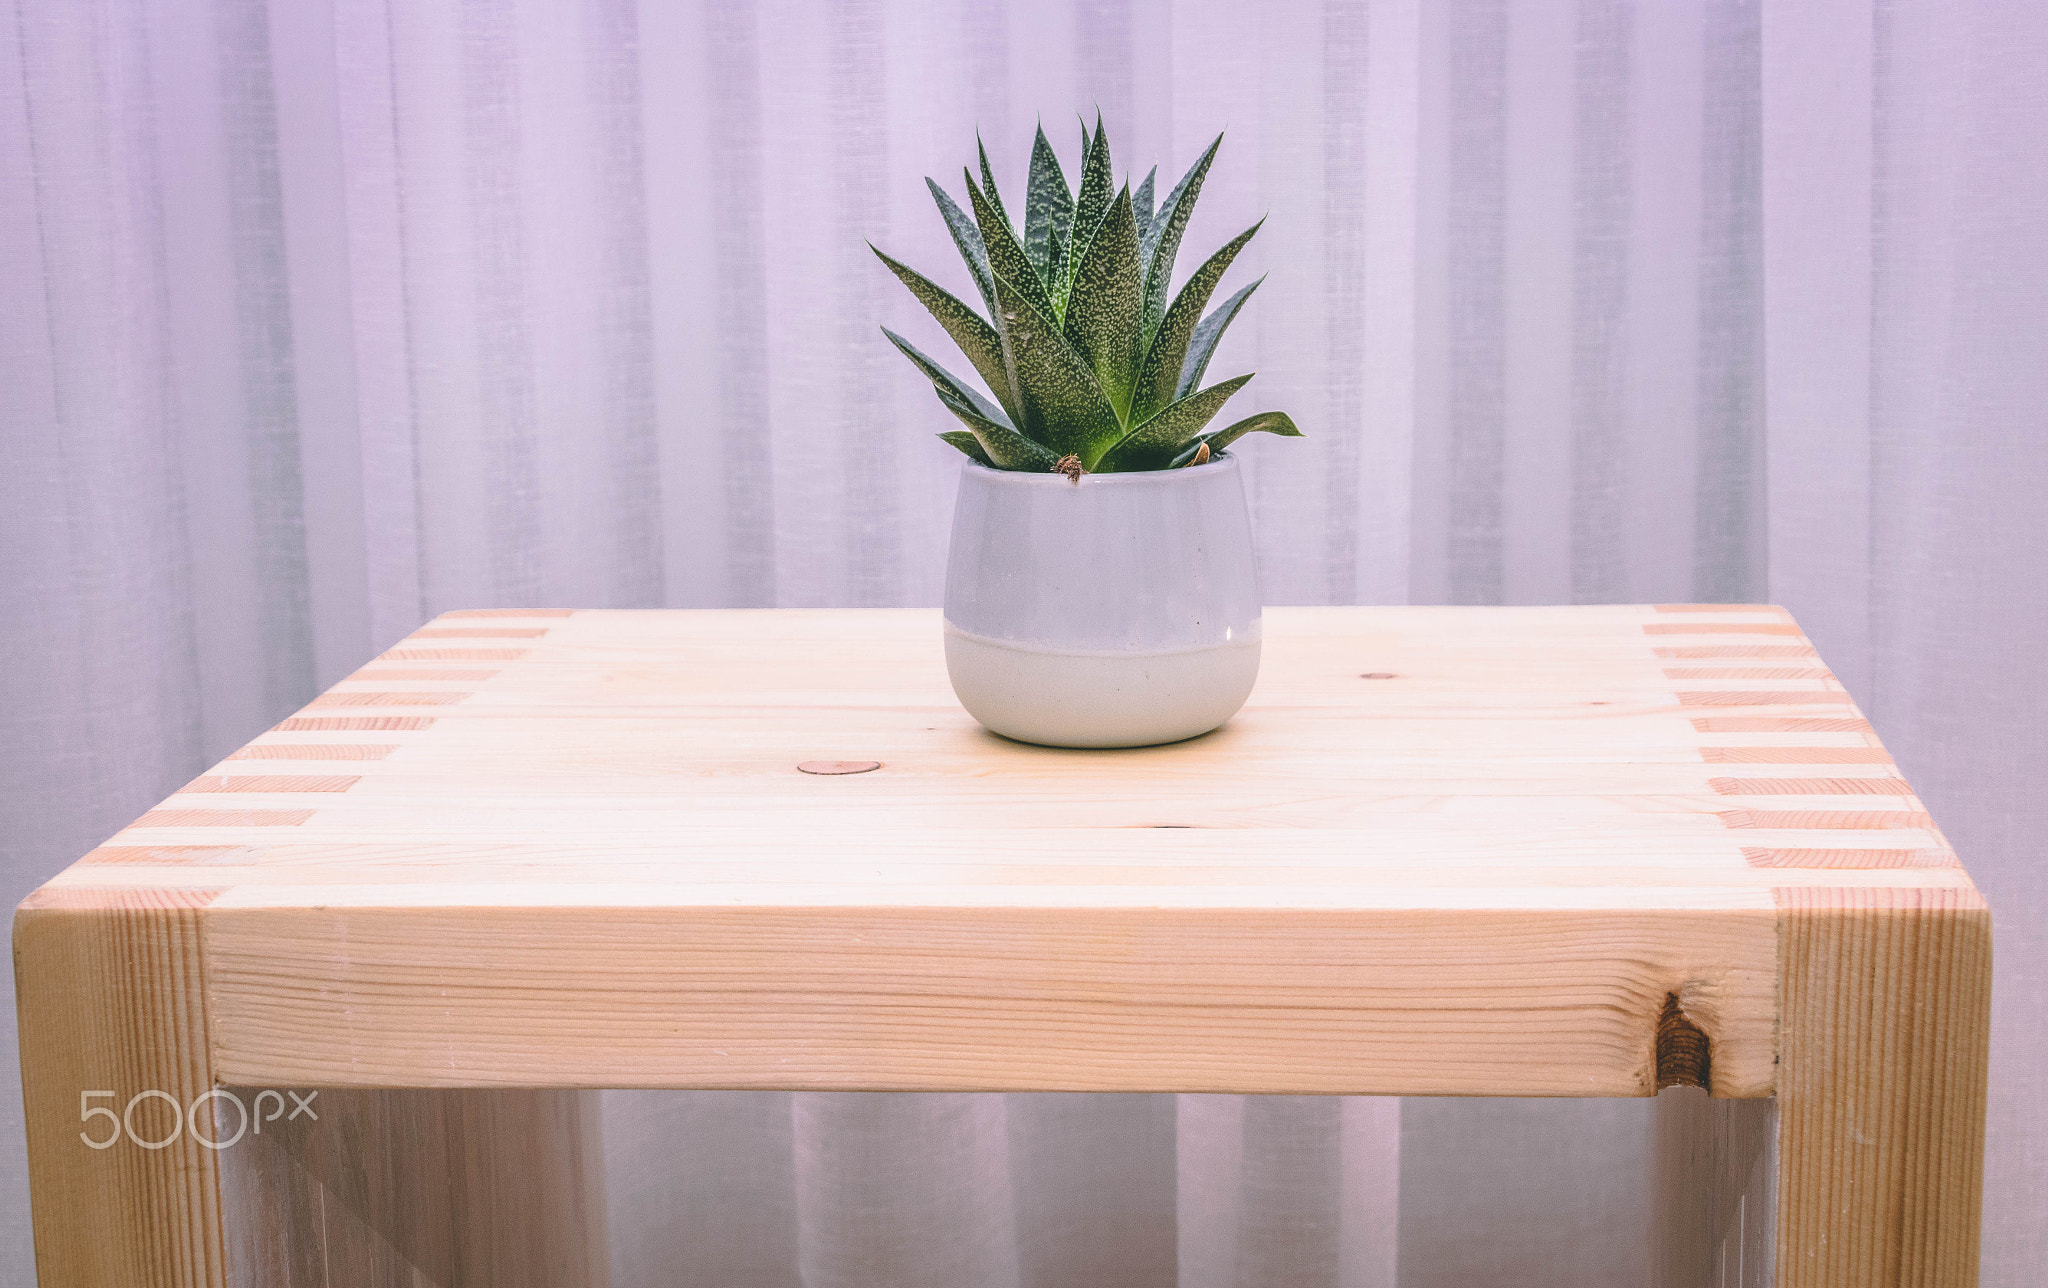 Single plant on wooden chair